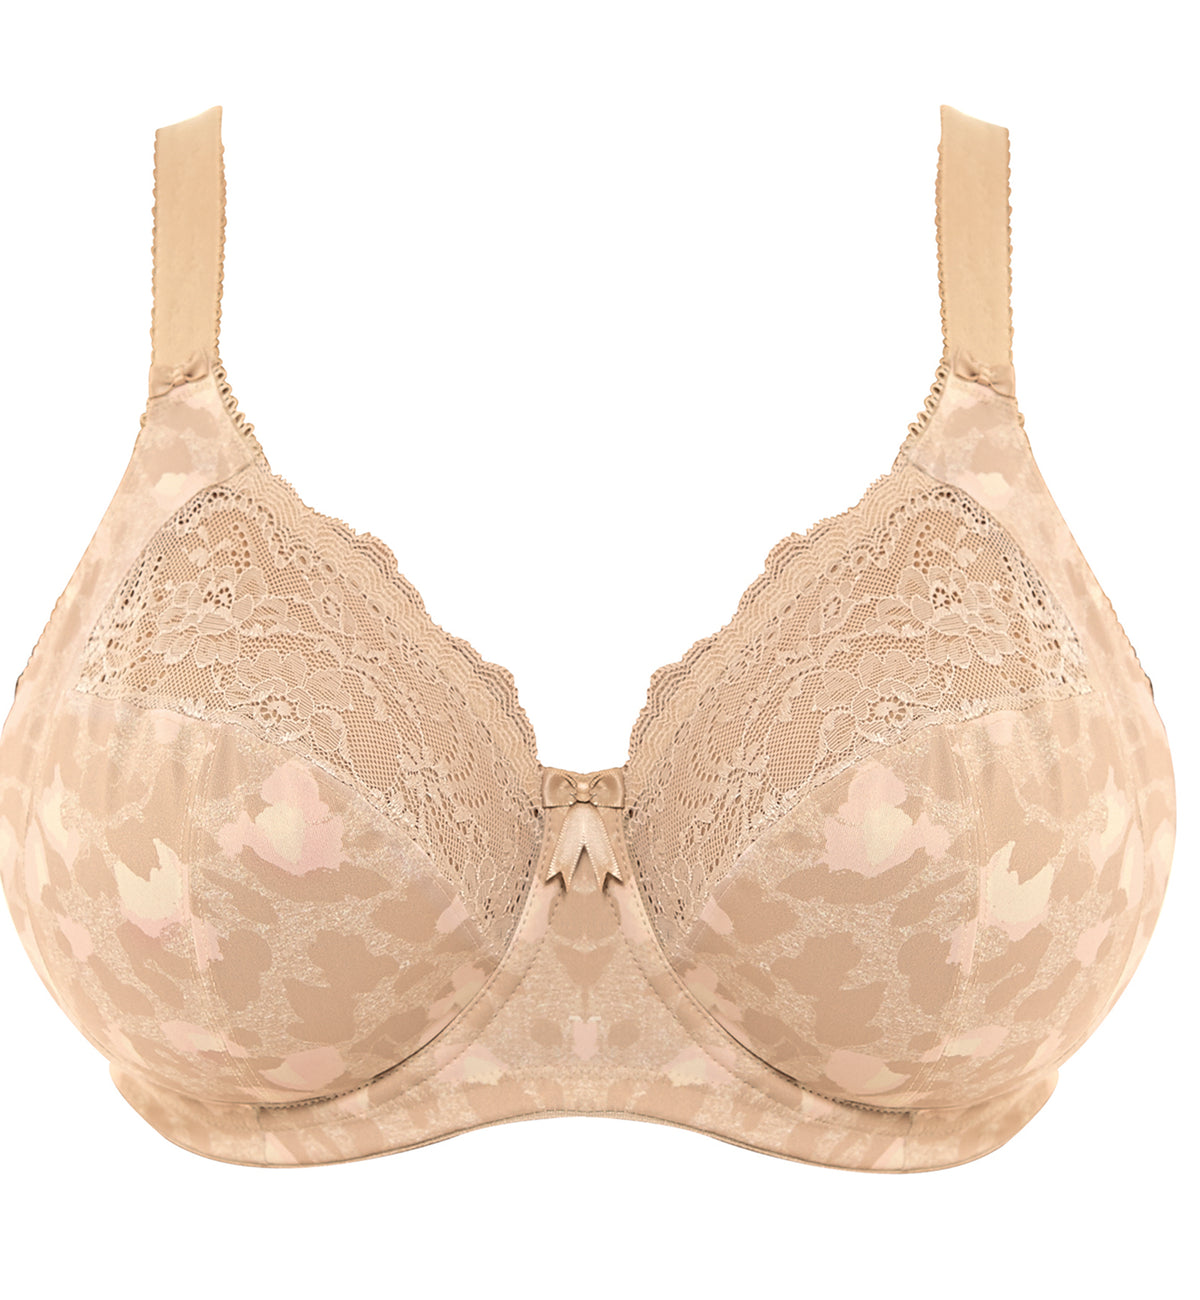 Elomi Morgan Stretch Lace Banded Underwire Bra (4110),32GG,Toasted Almond - Toasted Almond,32GG